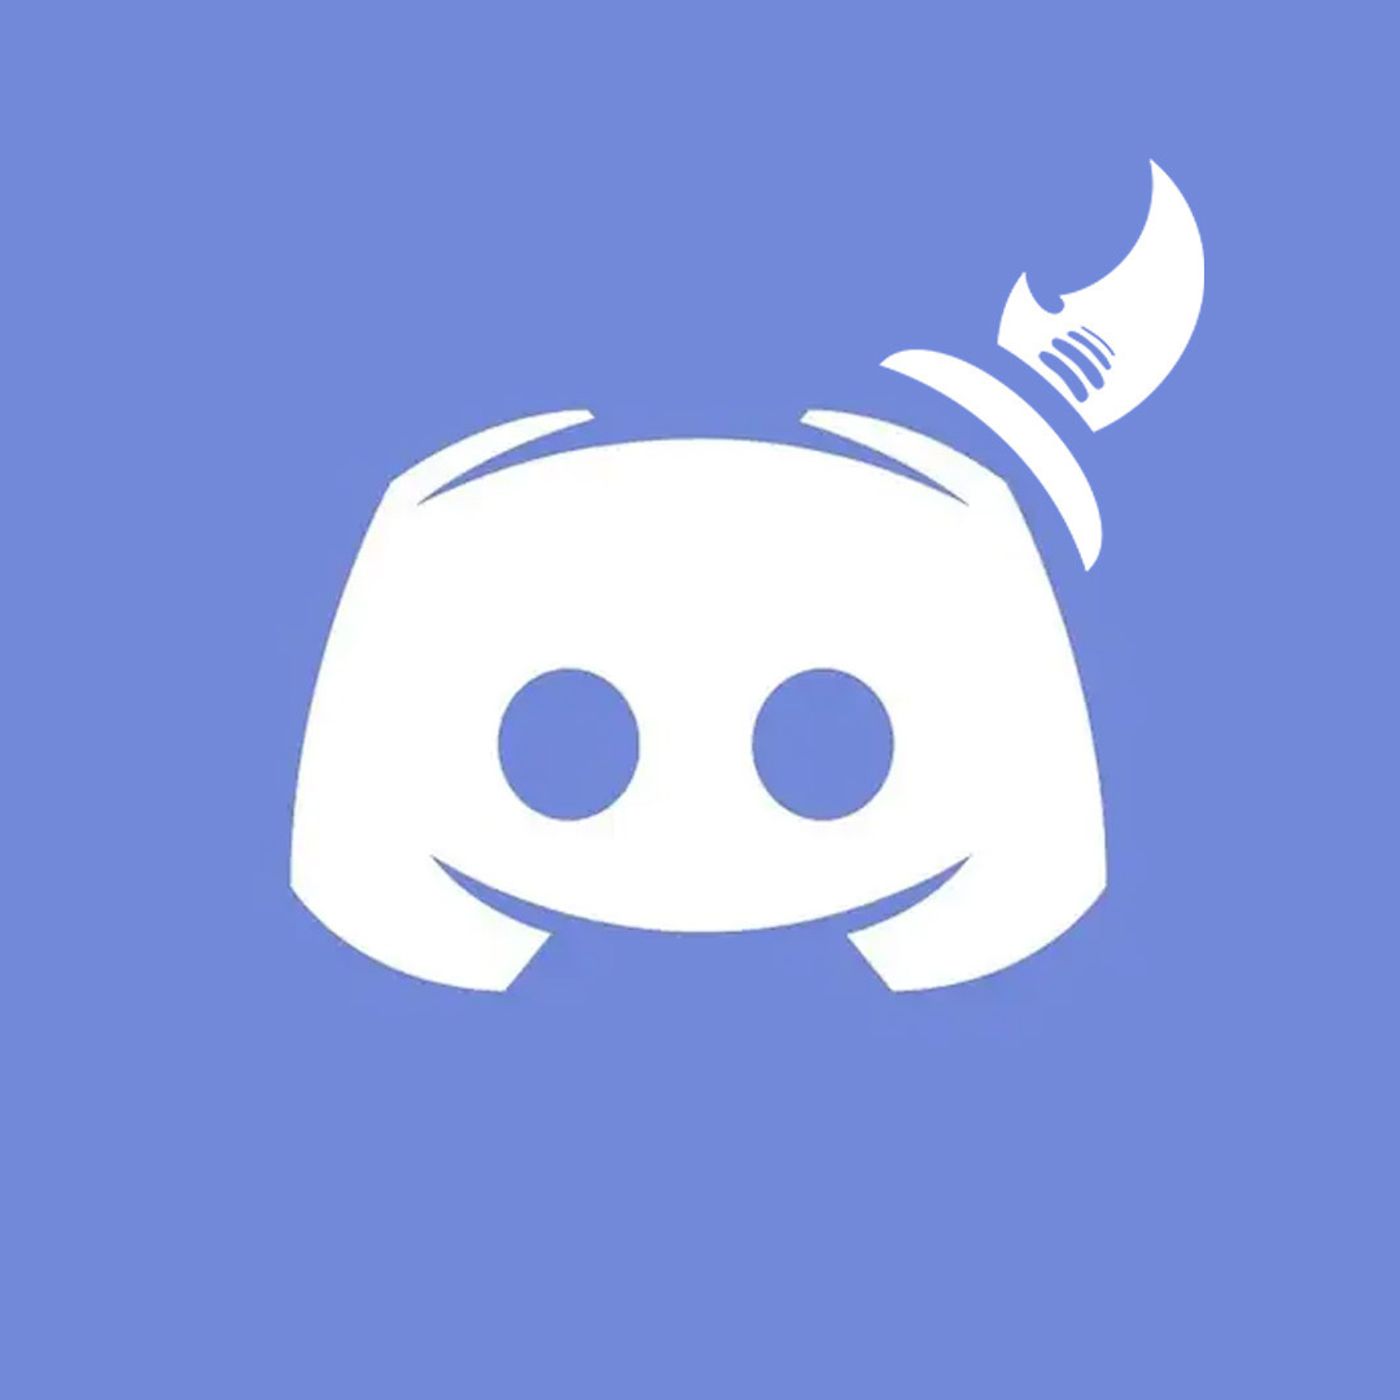 Giant Bomb Presents: Discord Q&A from November 11/10/22